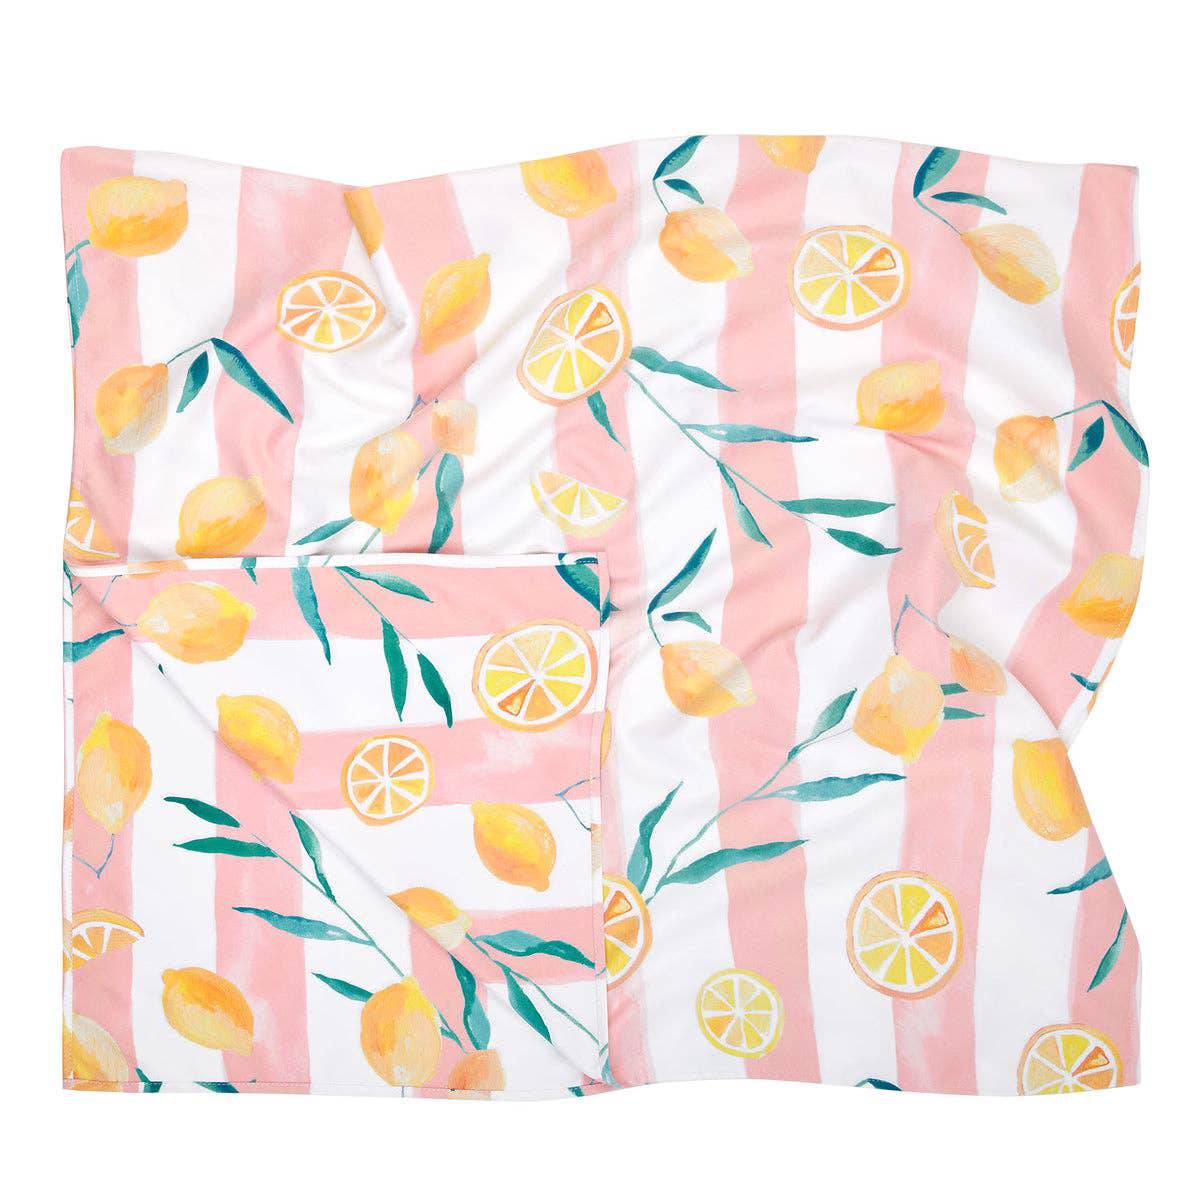 Dock &amp; Bay Quick Dry Towels - Life Gives You Lemons - 2 sizes - The Preppy Bunny